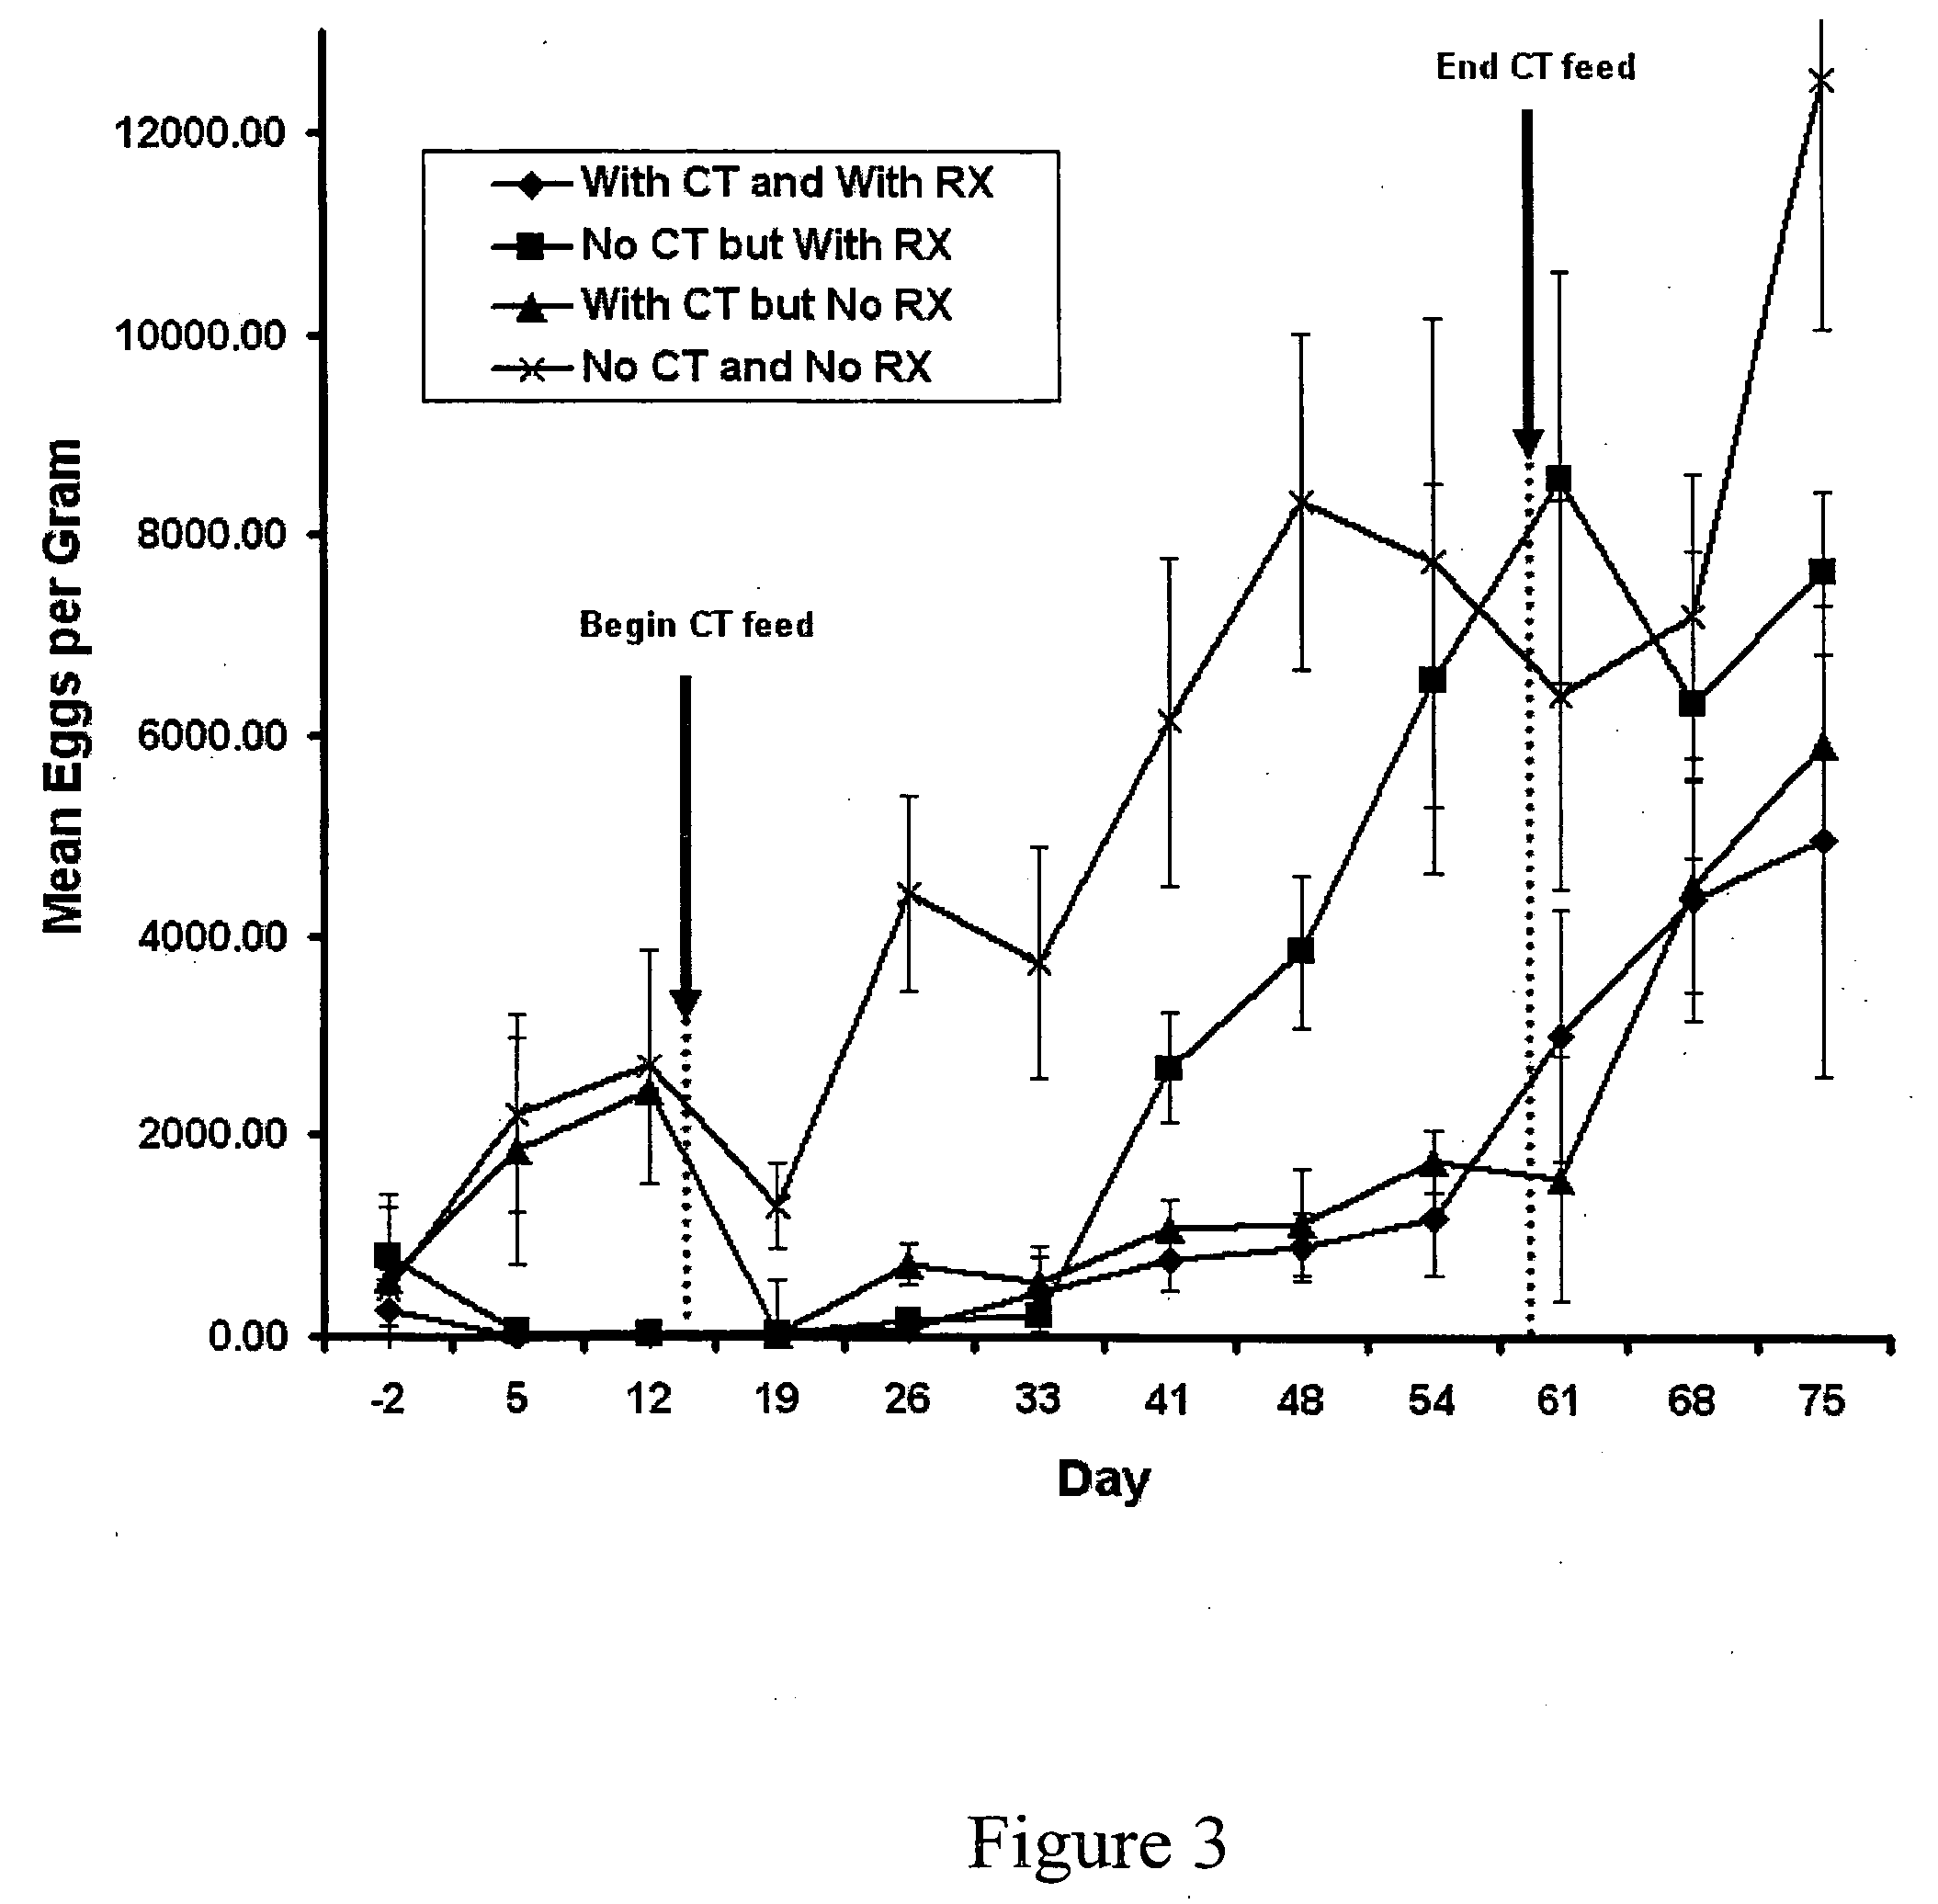 Method and composition for the control of gastrointestinal parasites in animals